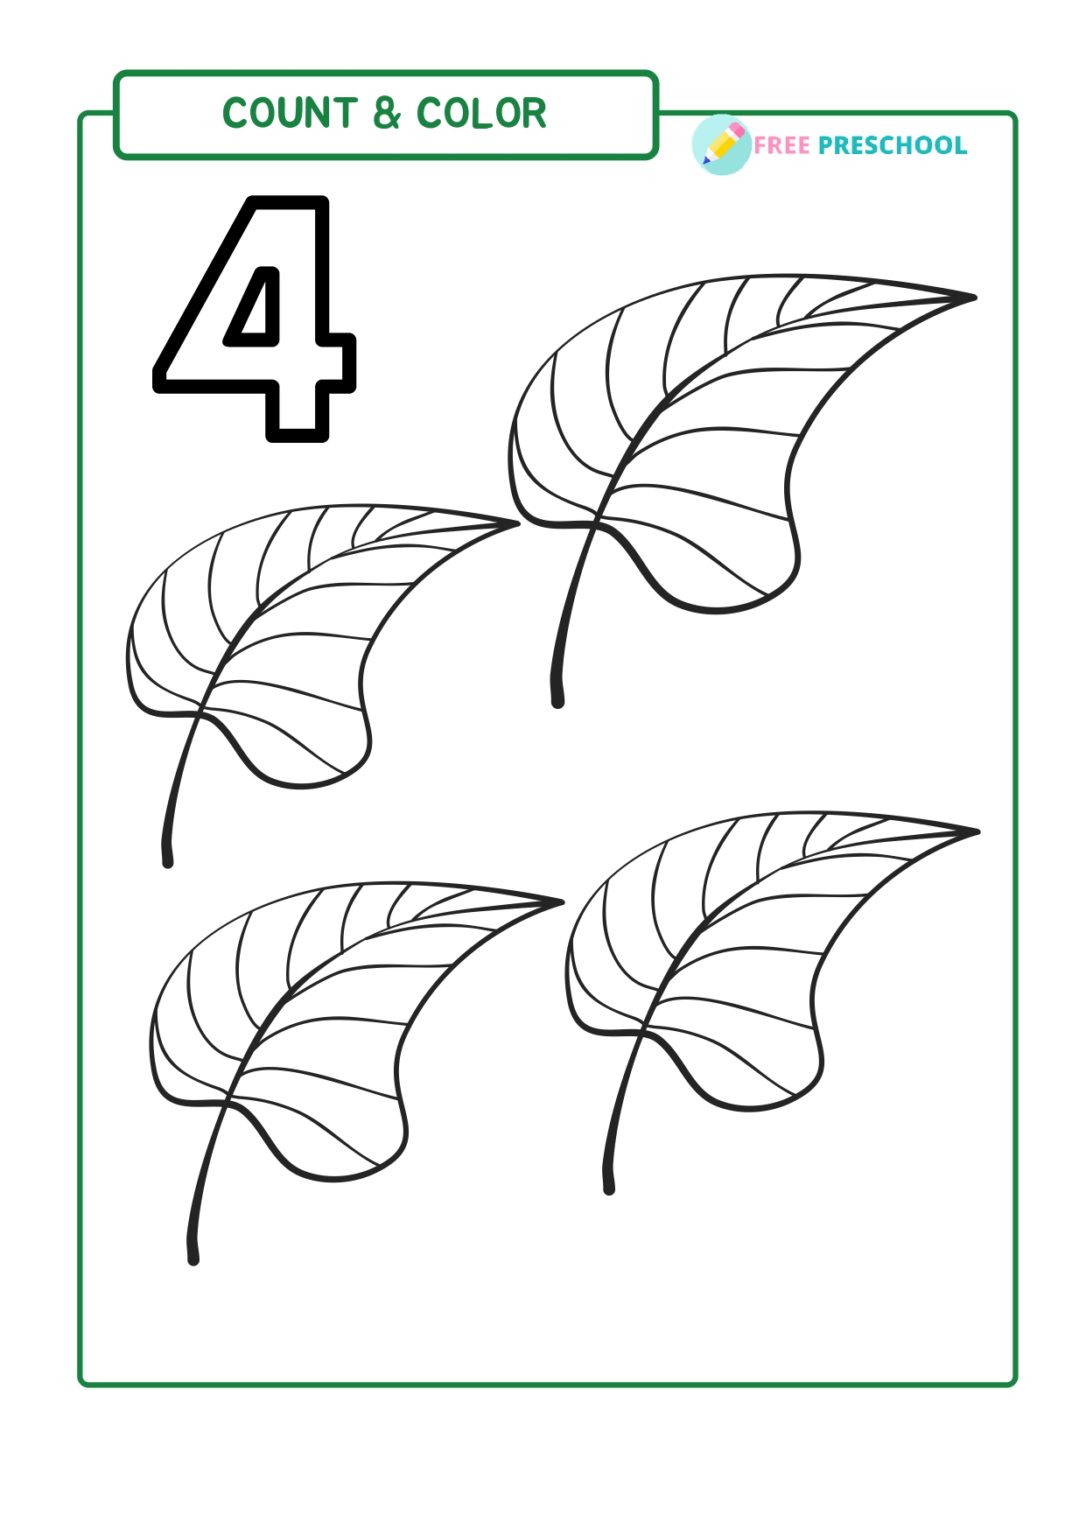 Number Count And Color Worksheets Free Preschool